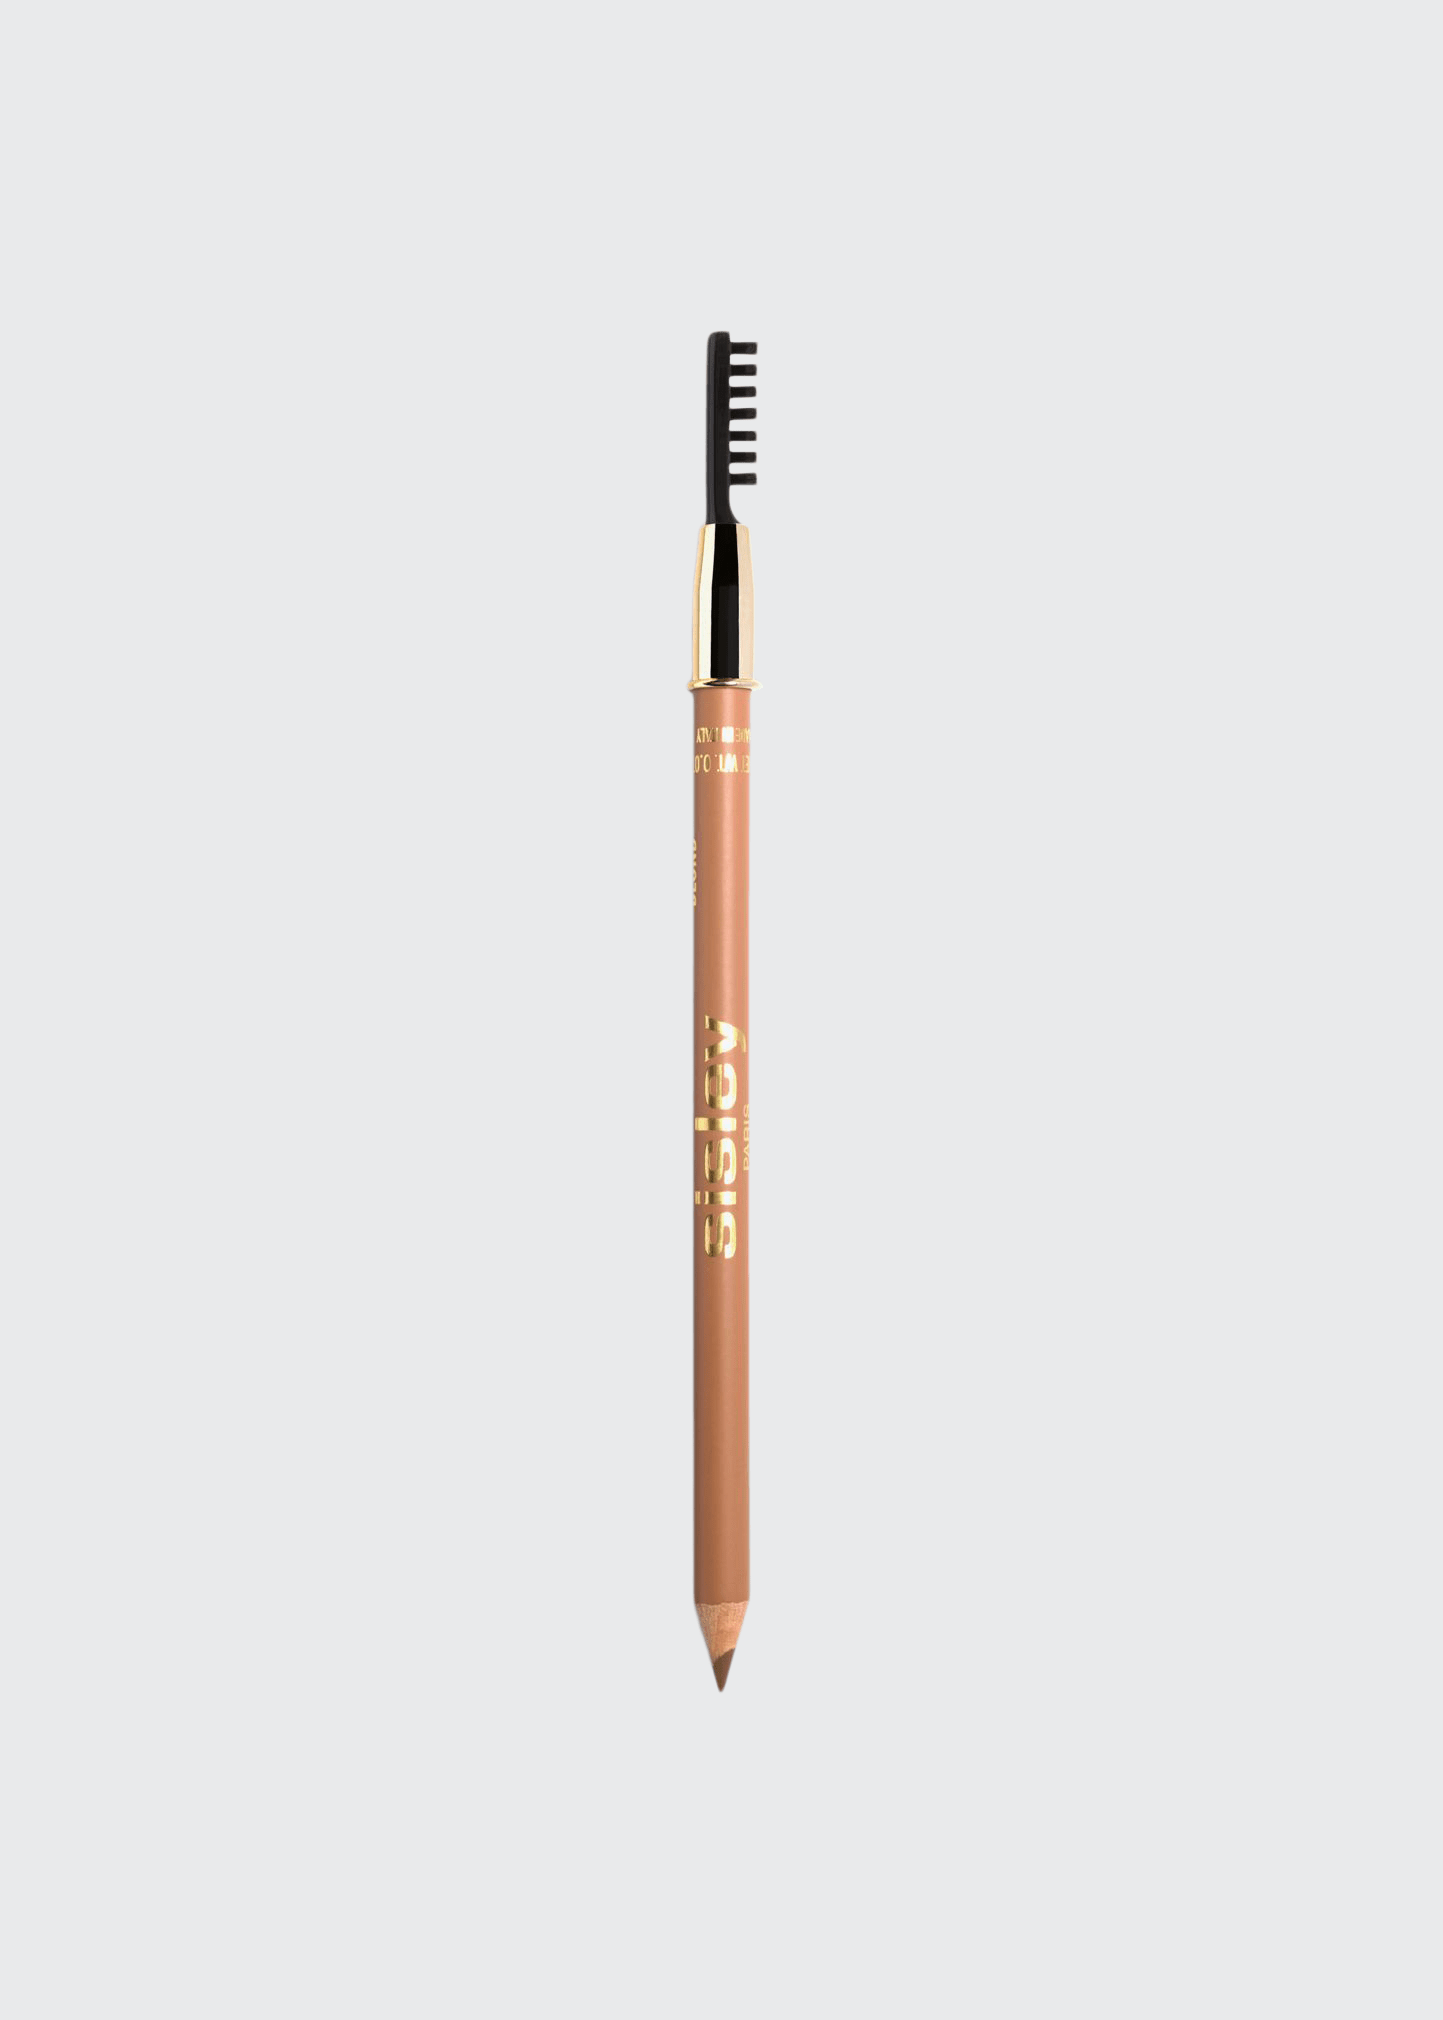 Sisley Paris Phyto-sourcils Perfect Eyebrow Pencil In 1 Blond